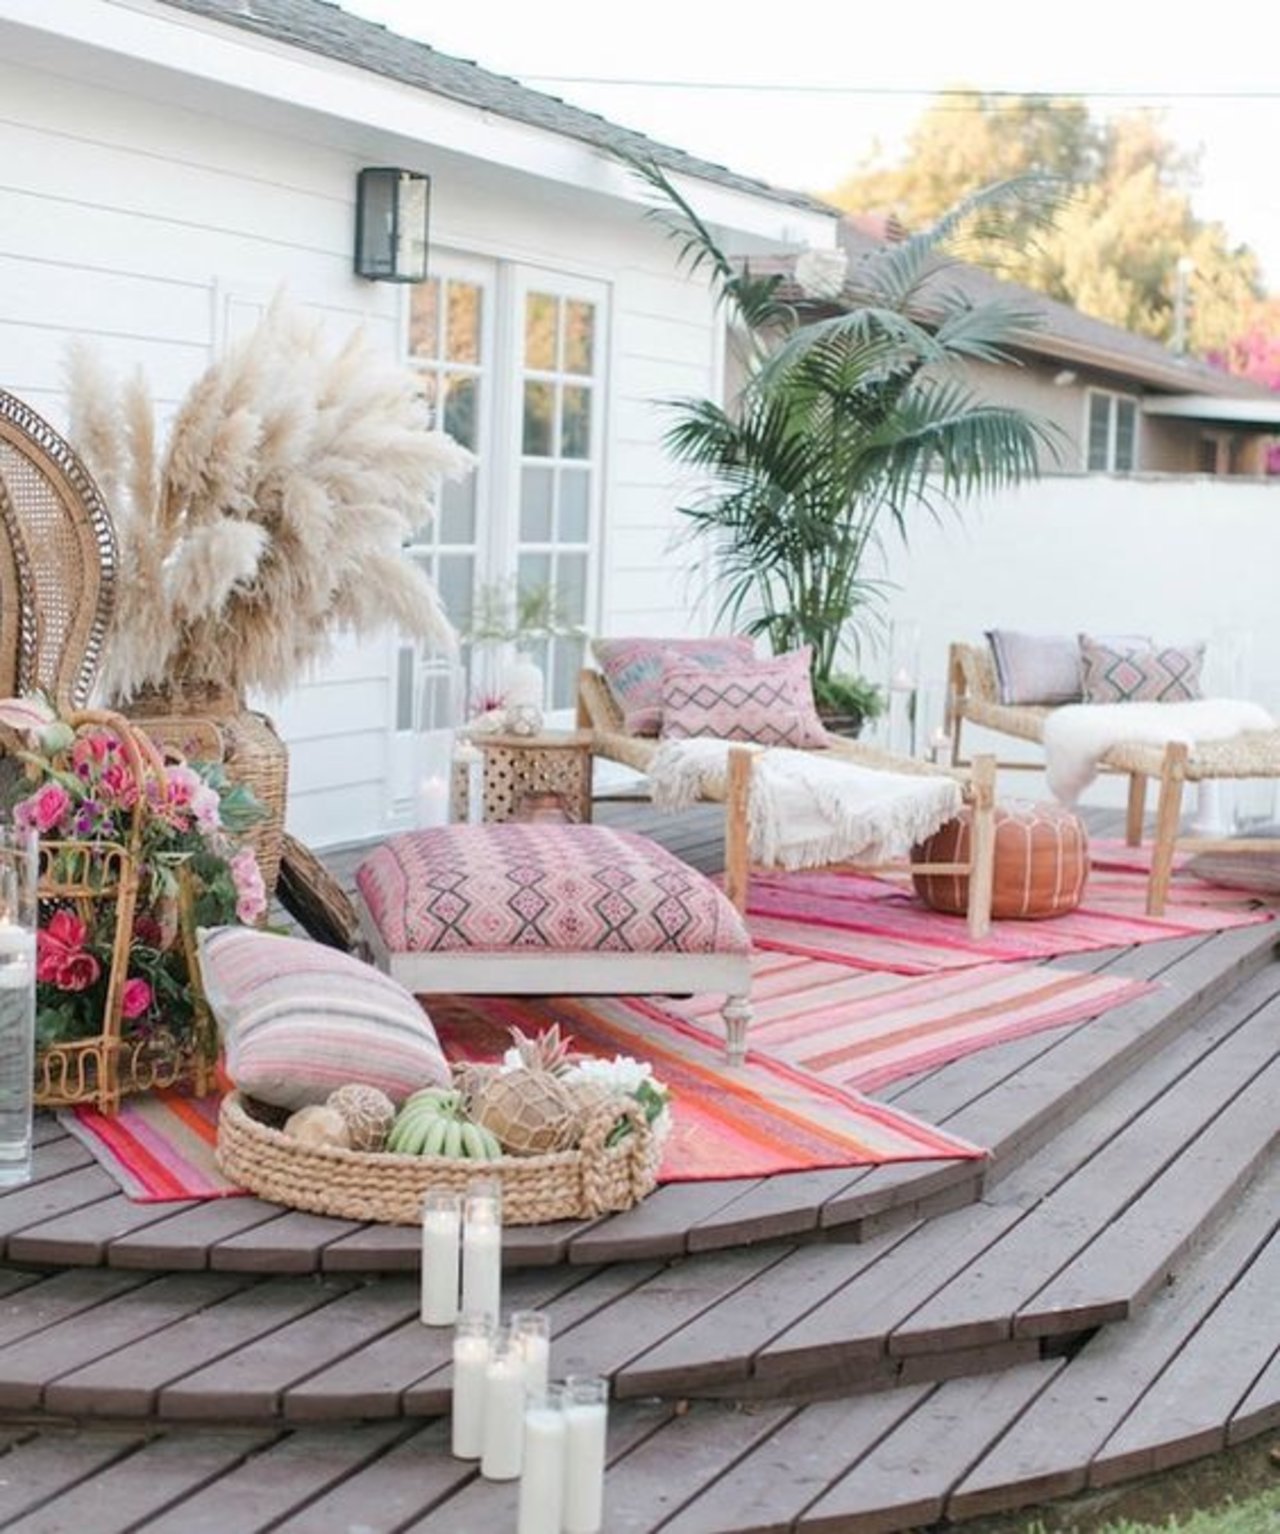 Outdoor deck with pink rugs and pillows